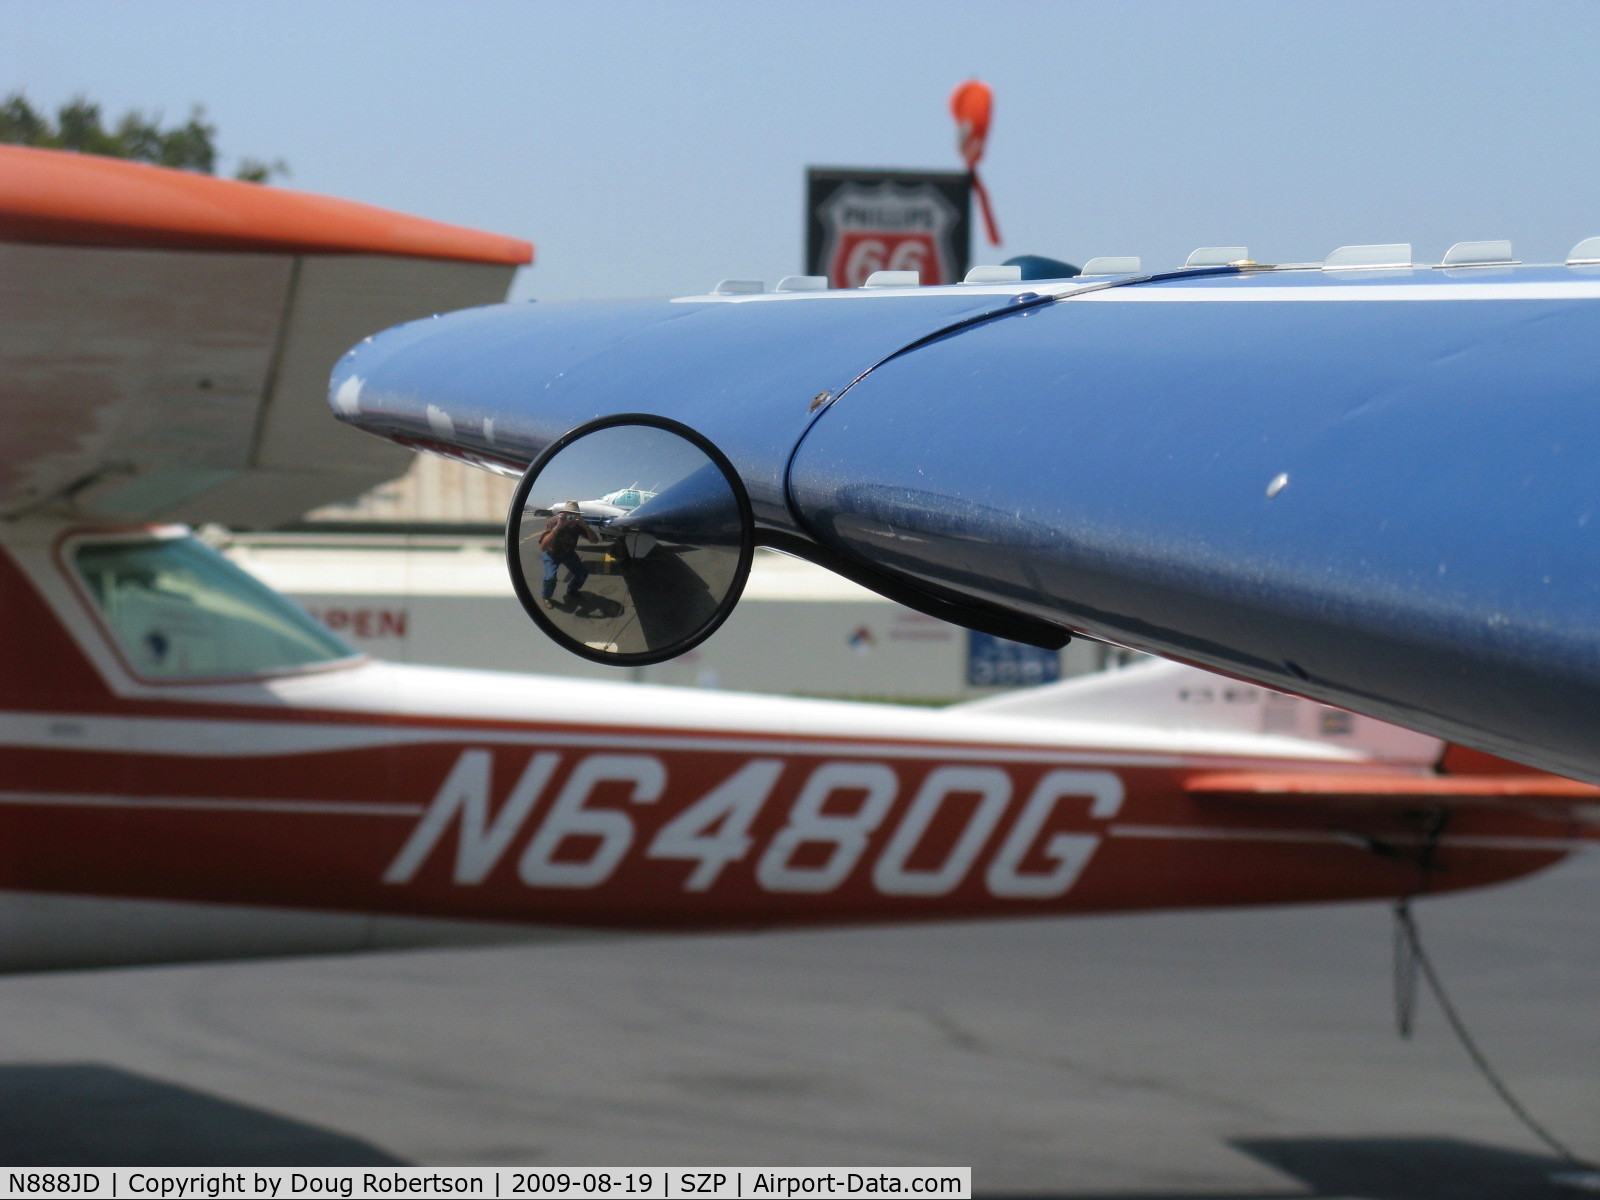 N888JD, 1968 Beech E95 C/N TD-720, 1968 Beech E95 TRAVEL AIR, two Lycoming IO-360s 180 Hp each, convex mirror shows retractible gear position (and photographer)